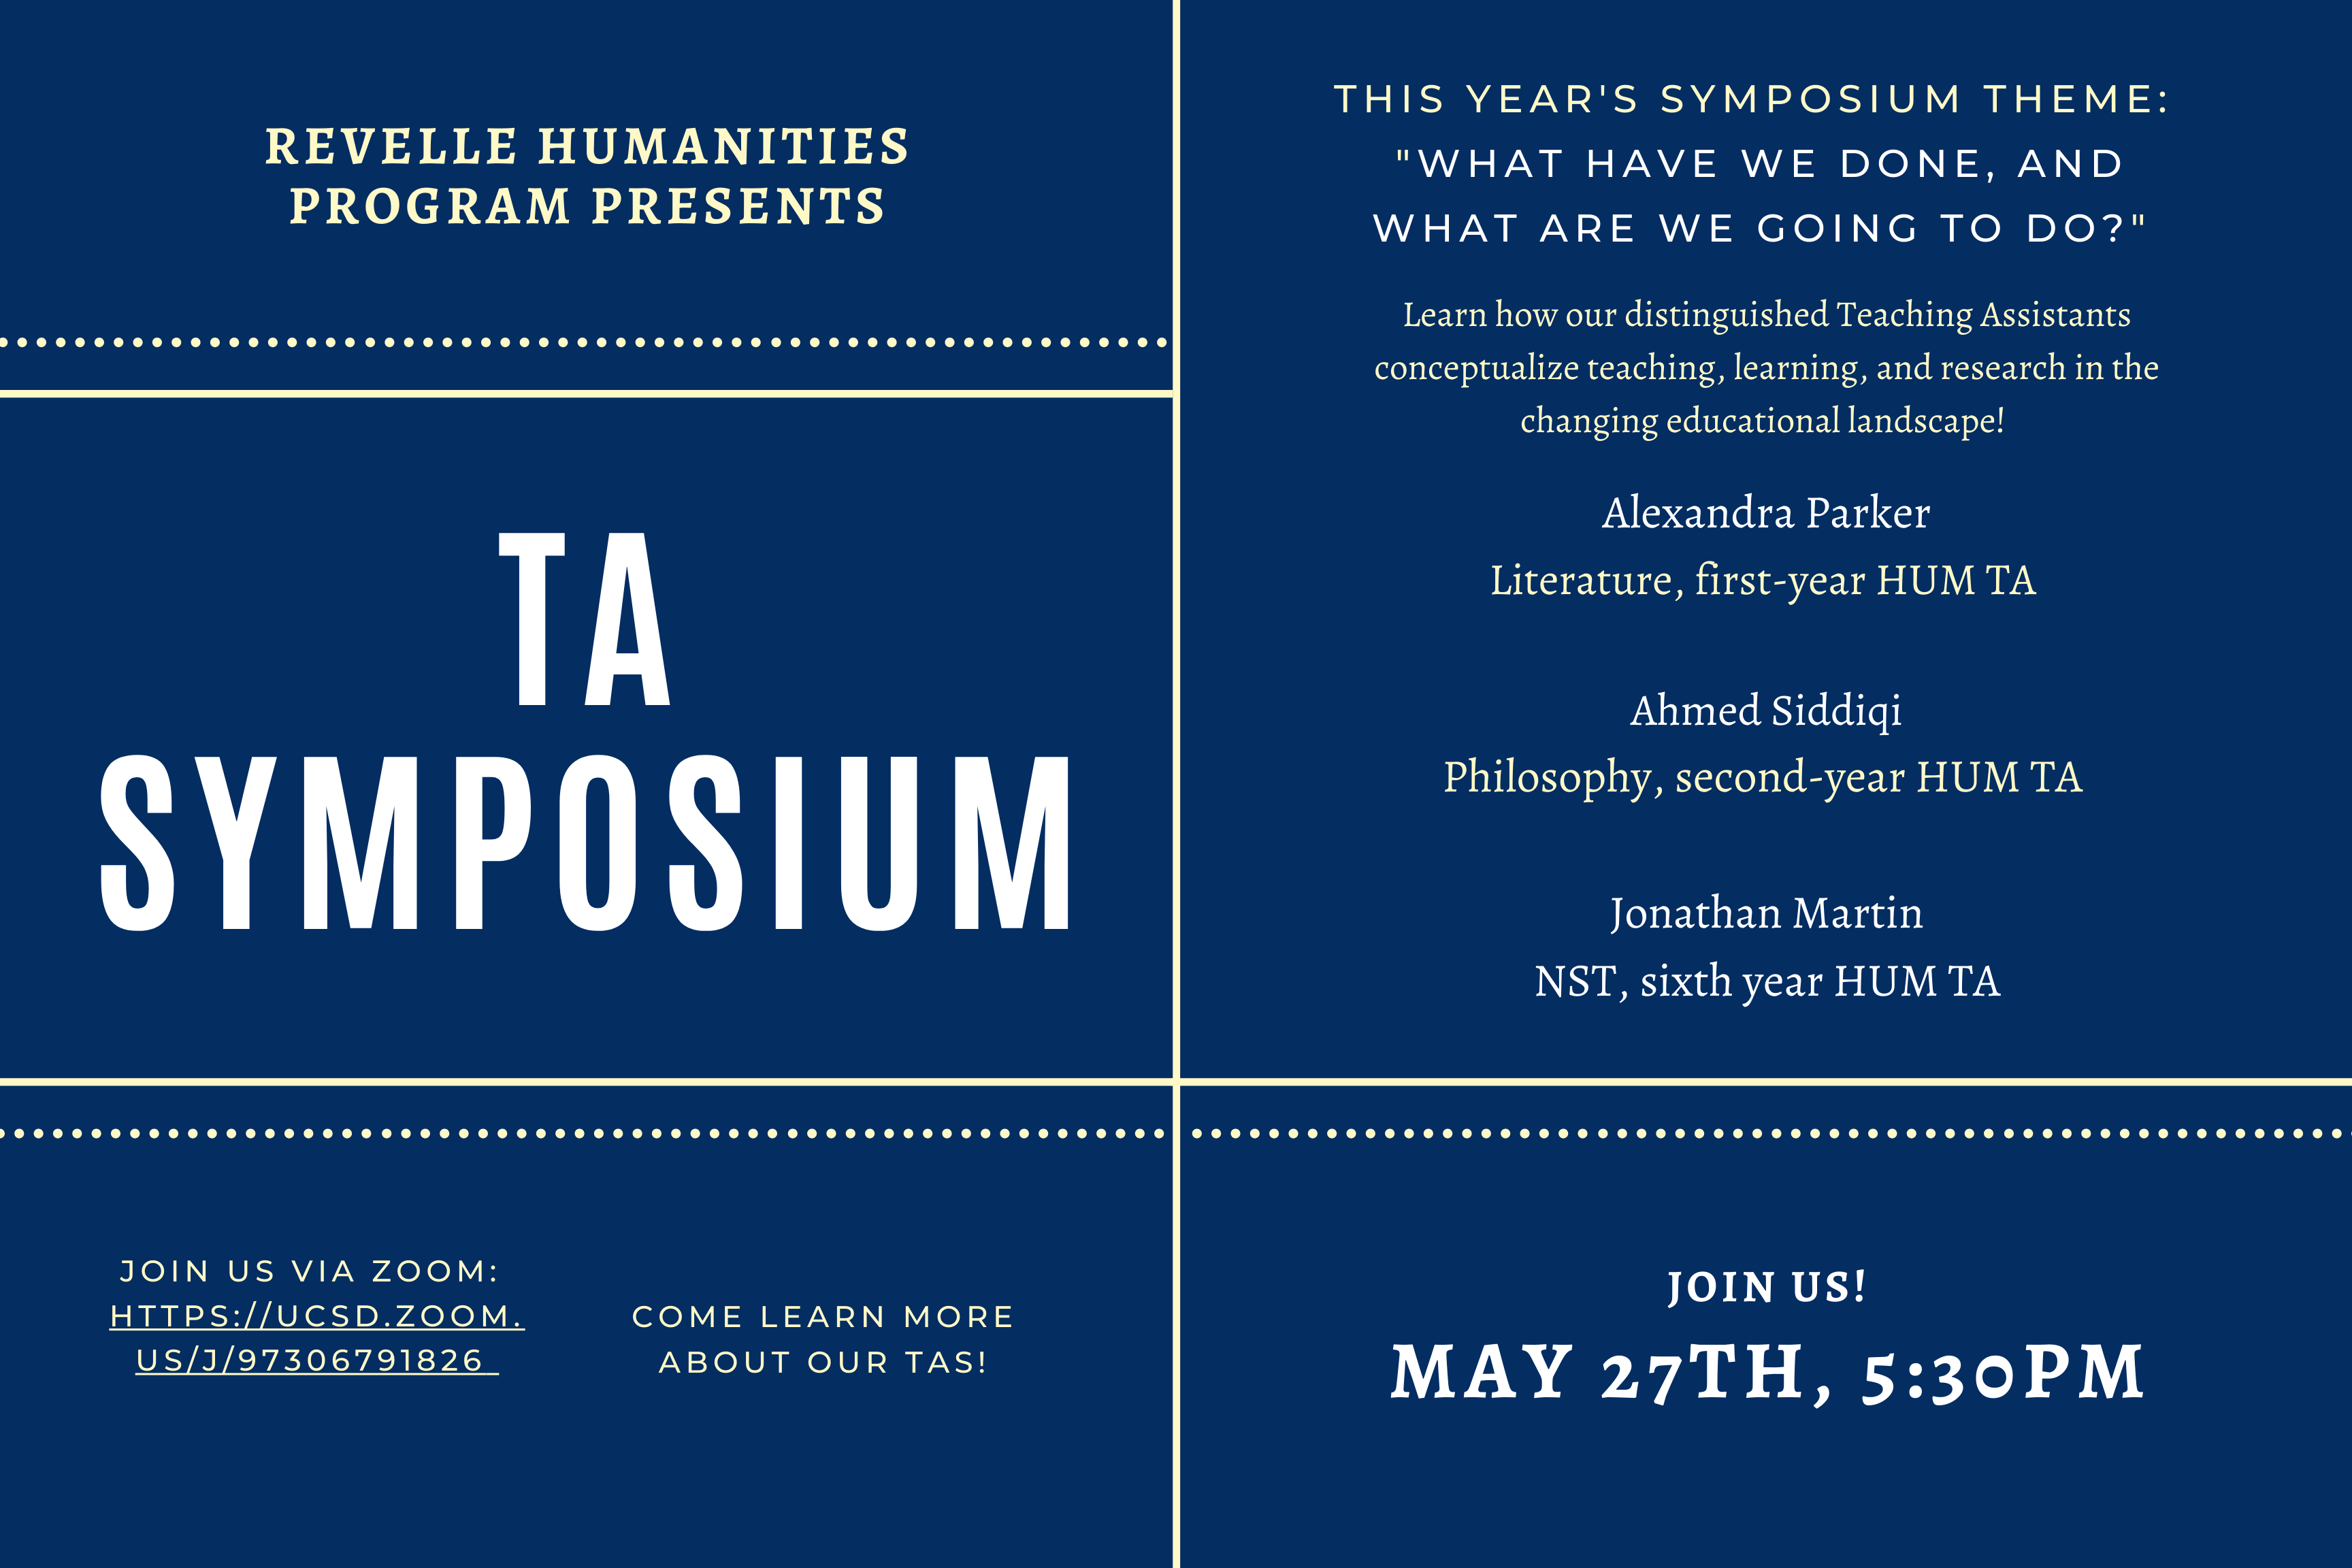 TA symposium on May 27 at 5:30pm. Link to the event Zoom is above, titled "Join Here."